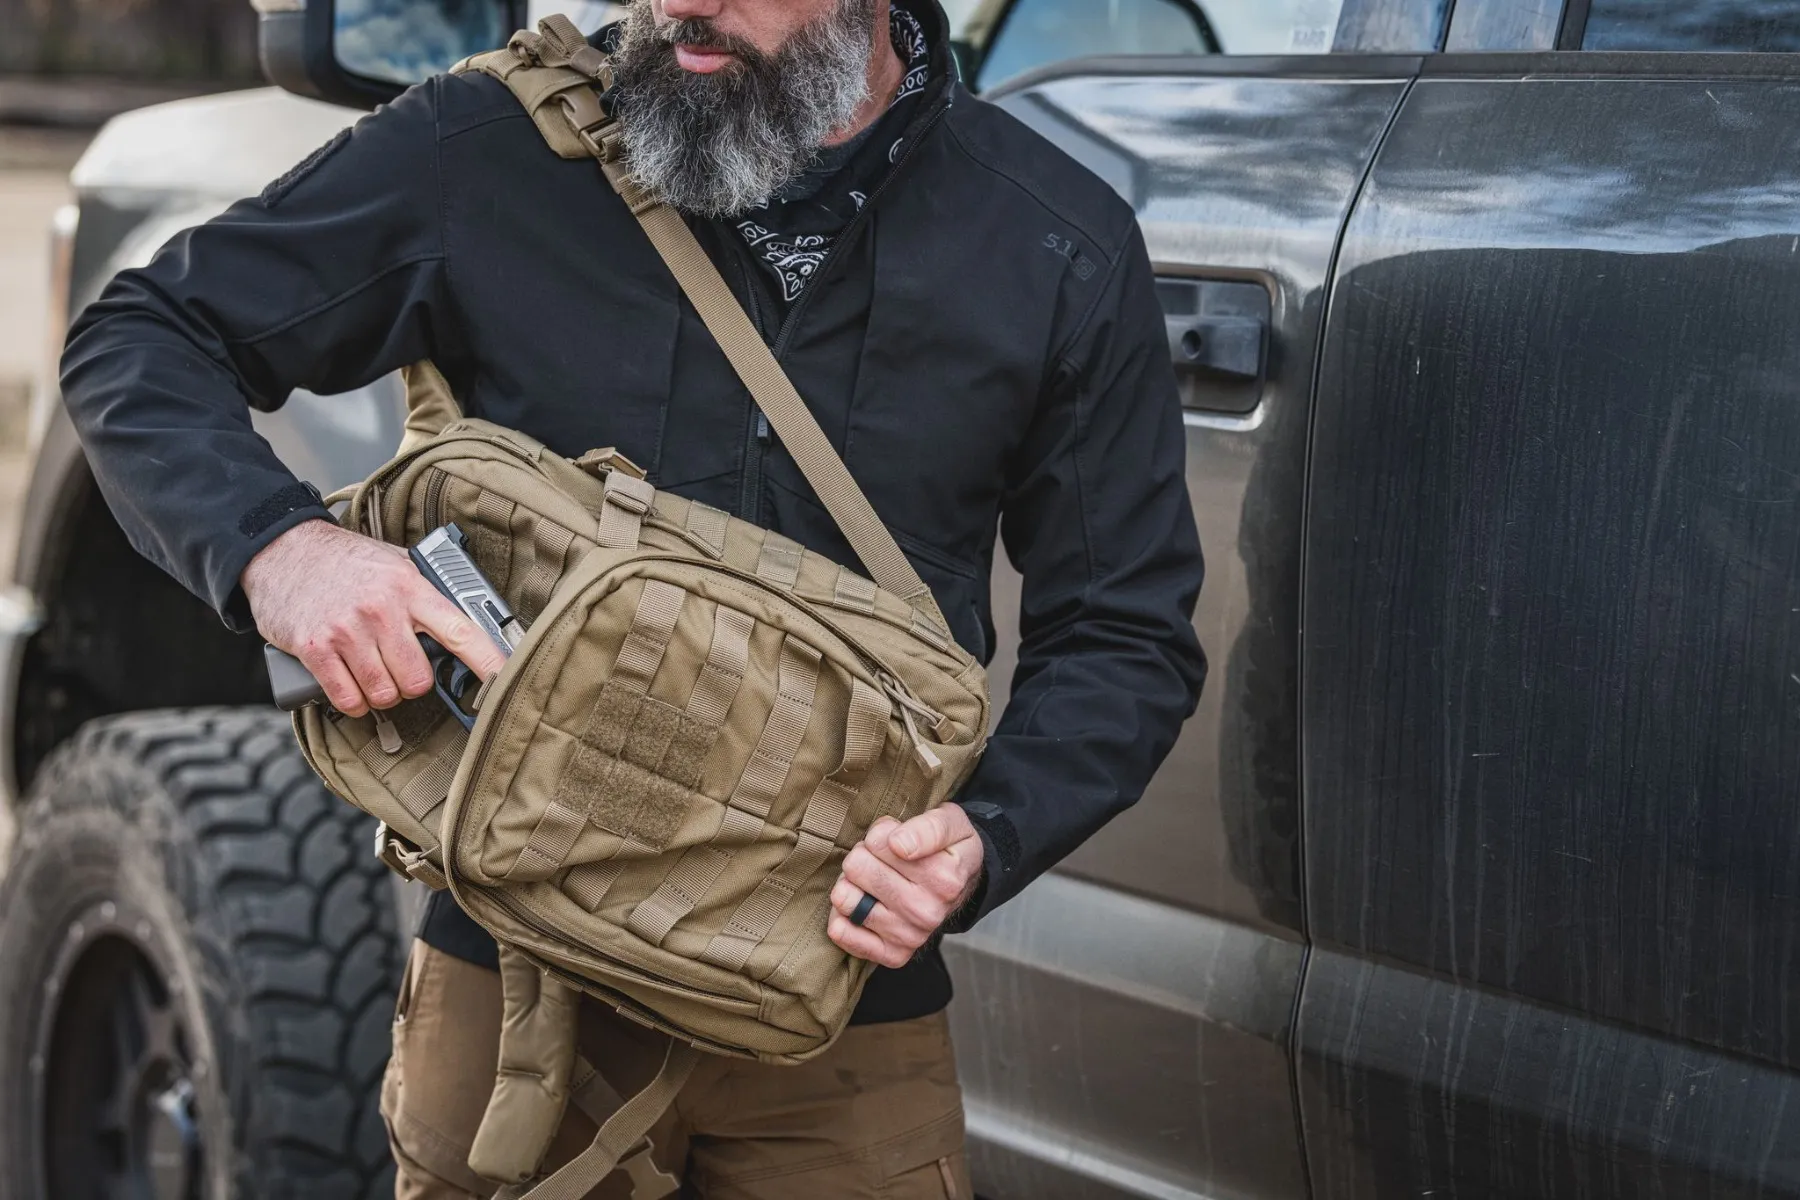 How to Choose a Concealed Carry Backpack